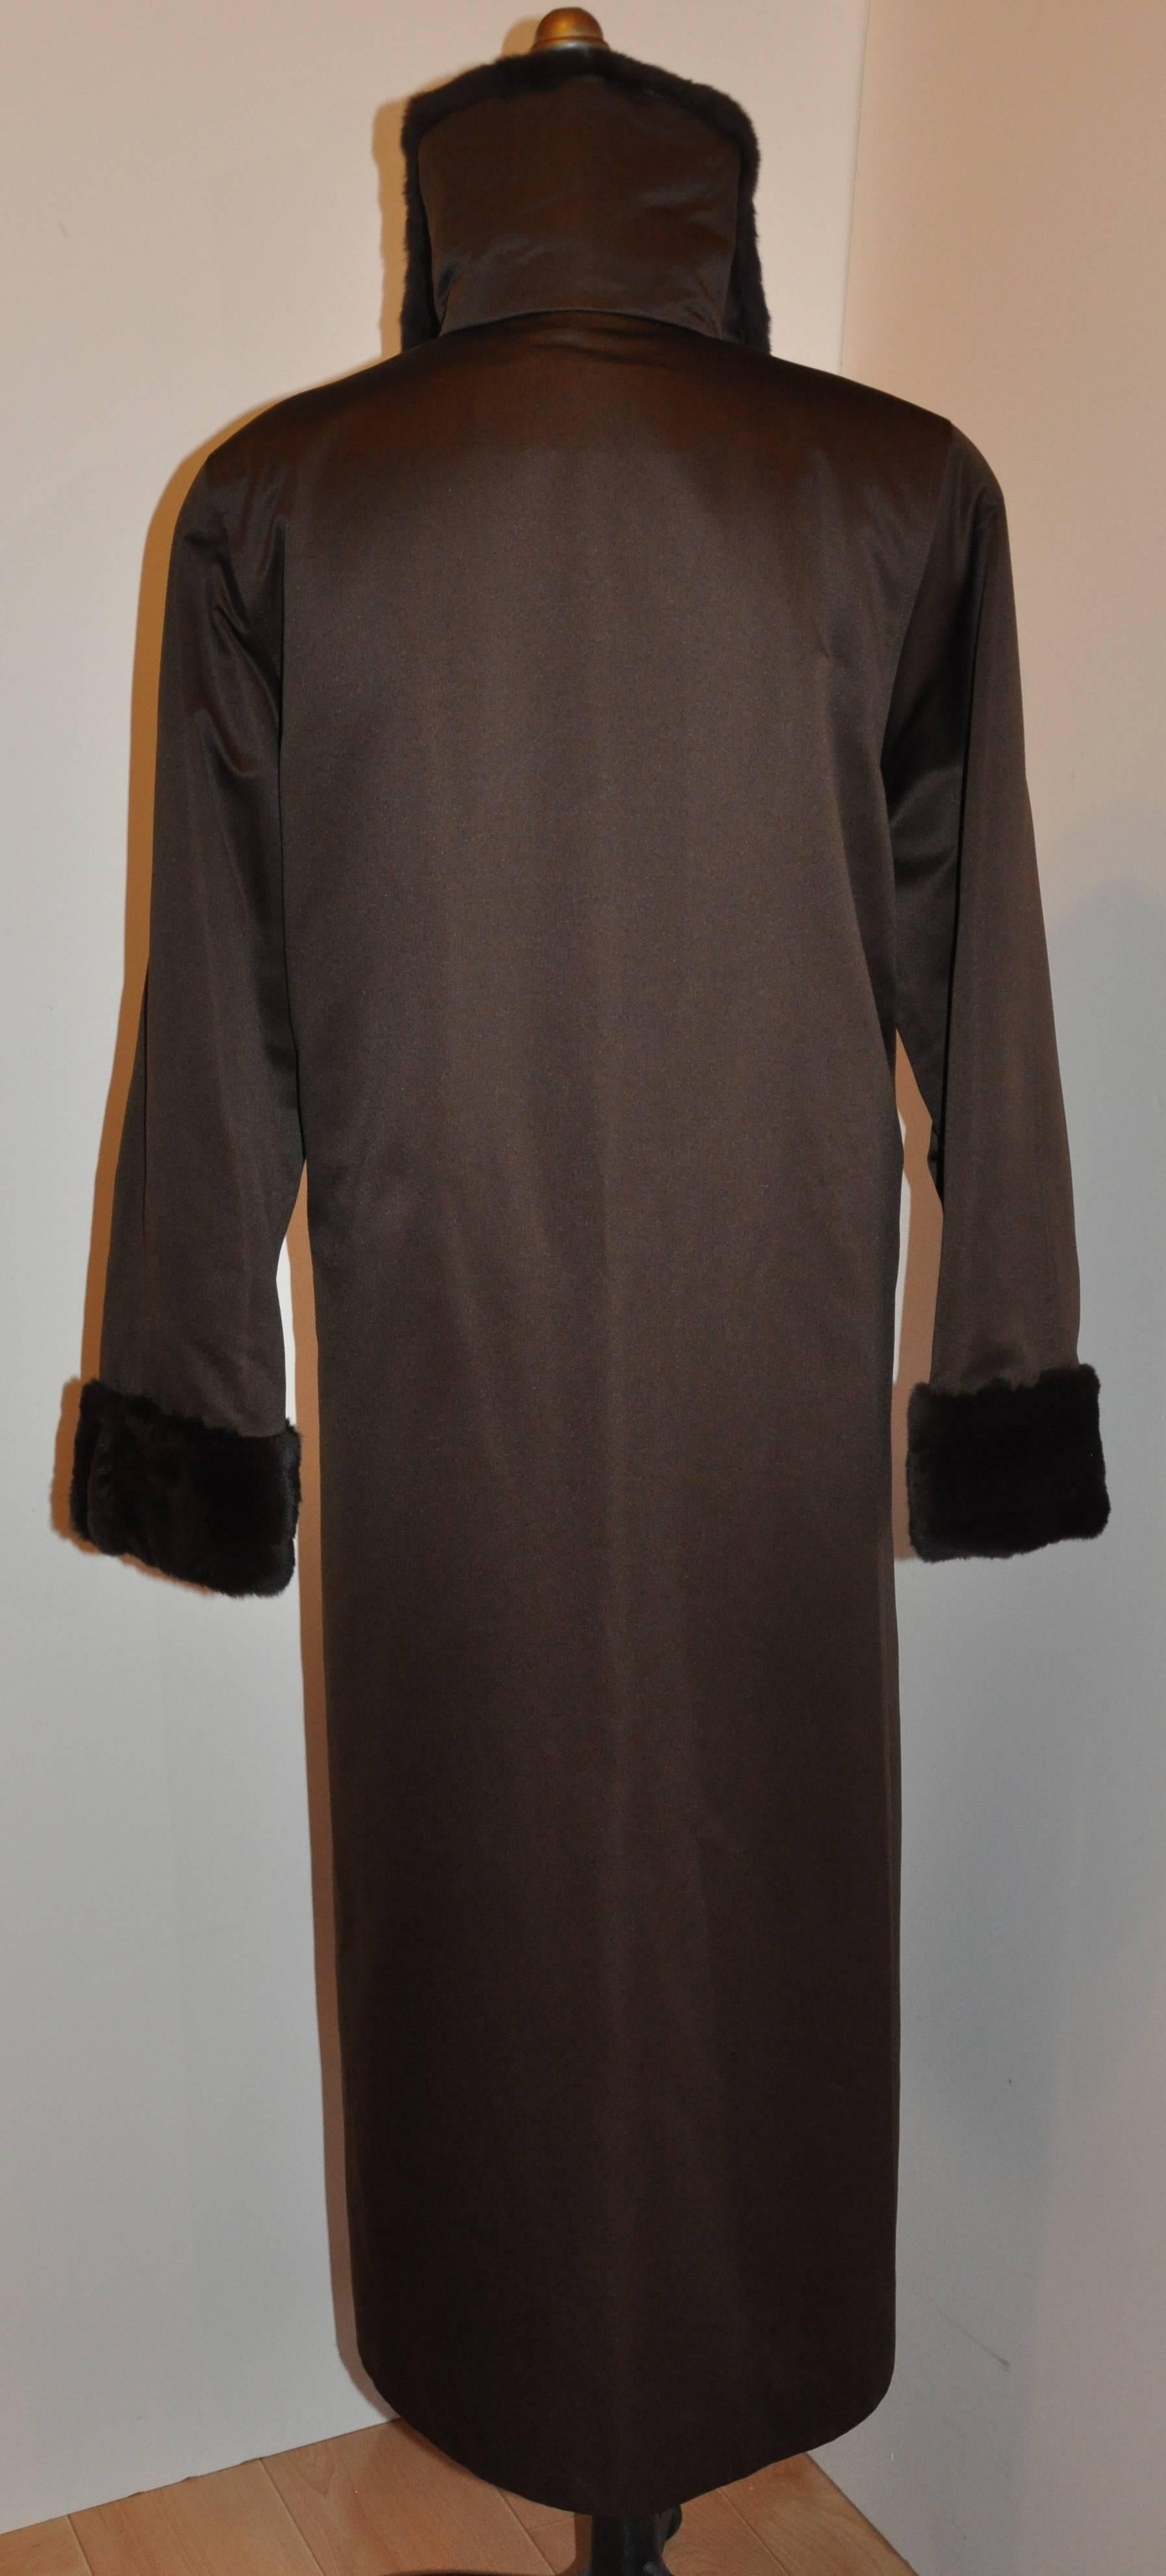       Lowenthal's wonderfully classic, timeless and elegant coco-brown silk satin evening coat is actually a four-season coat with it's detachable female-skin sheared mink lining. The silk satin coat is of a medium weight along with it's own